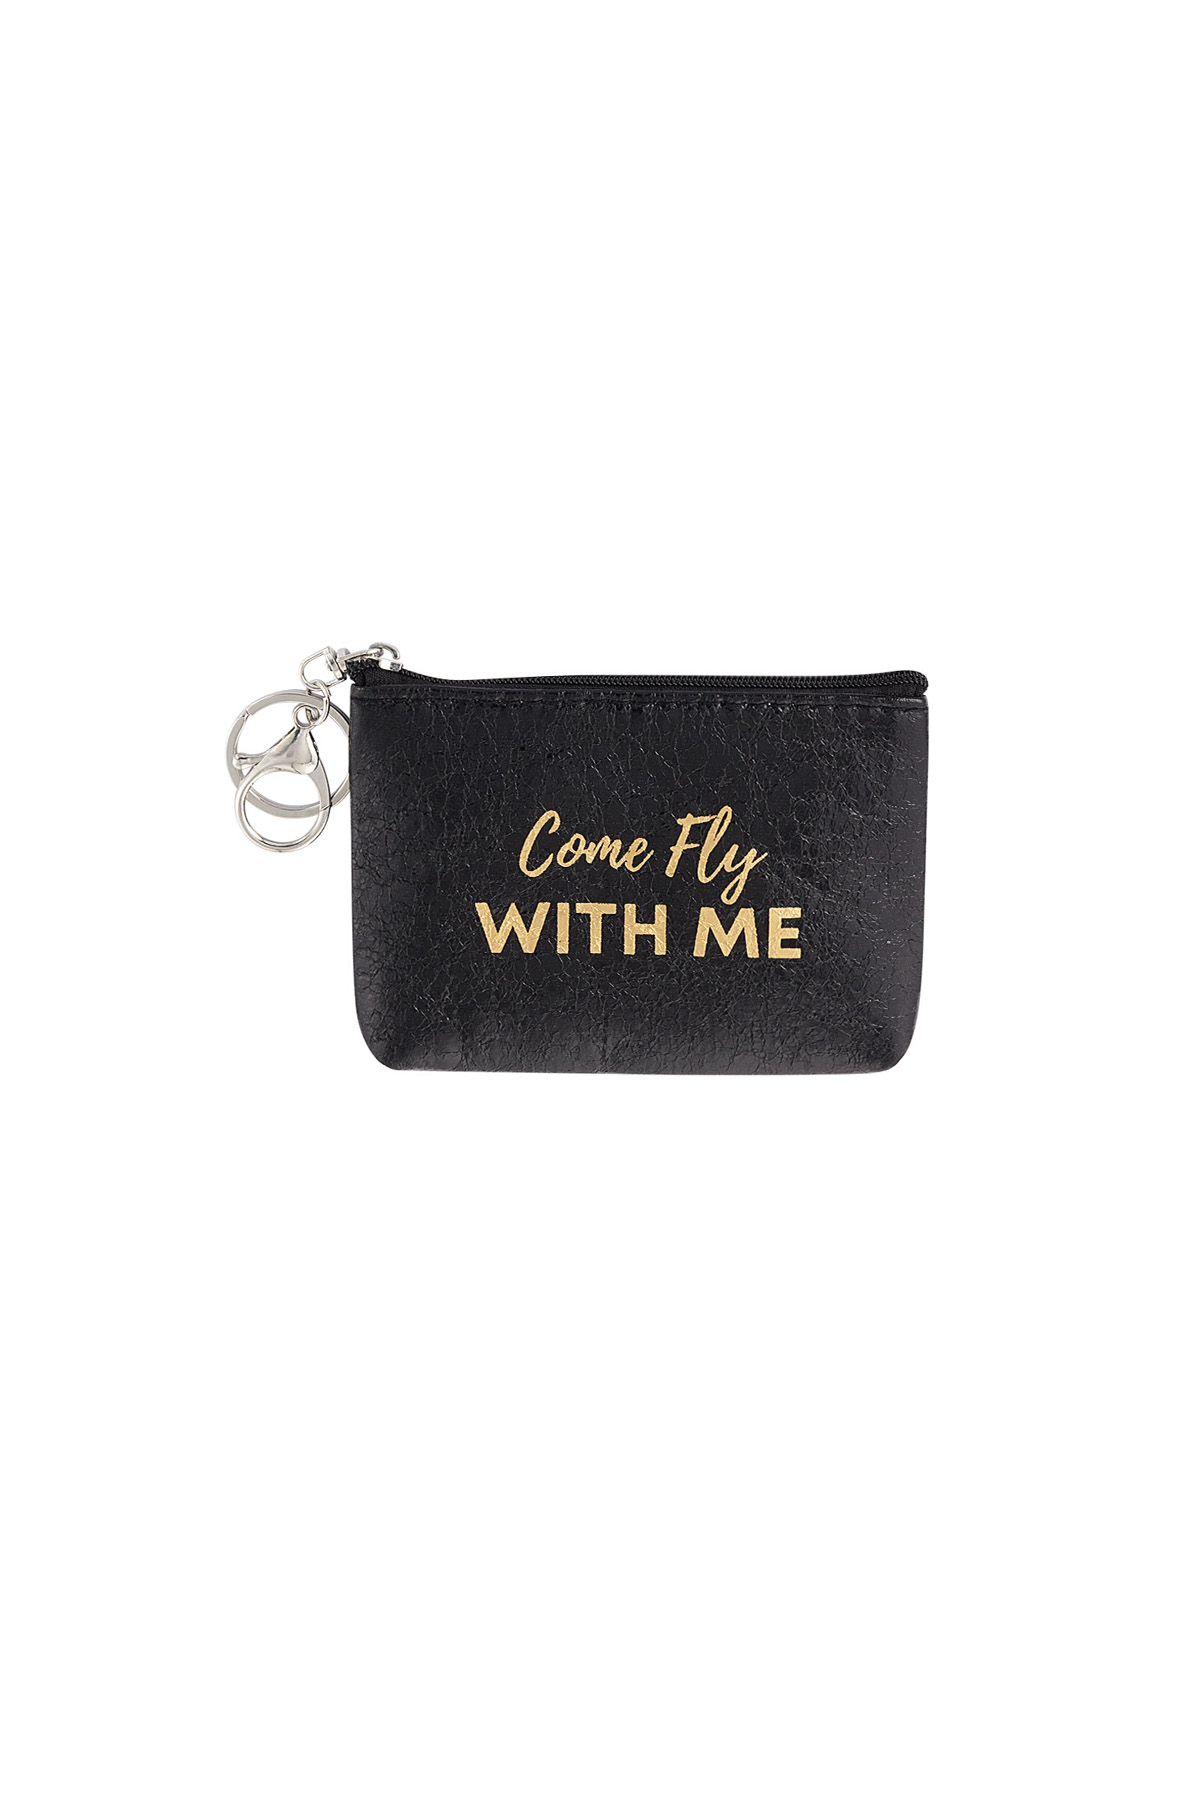 Keychain wallet metallic come fly with me - black h5 